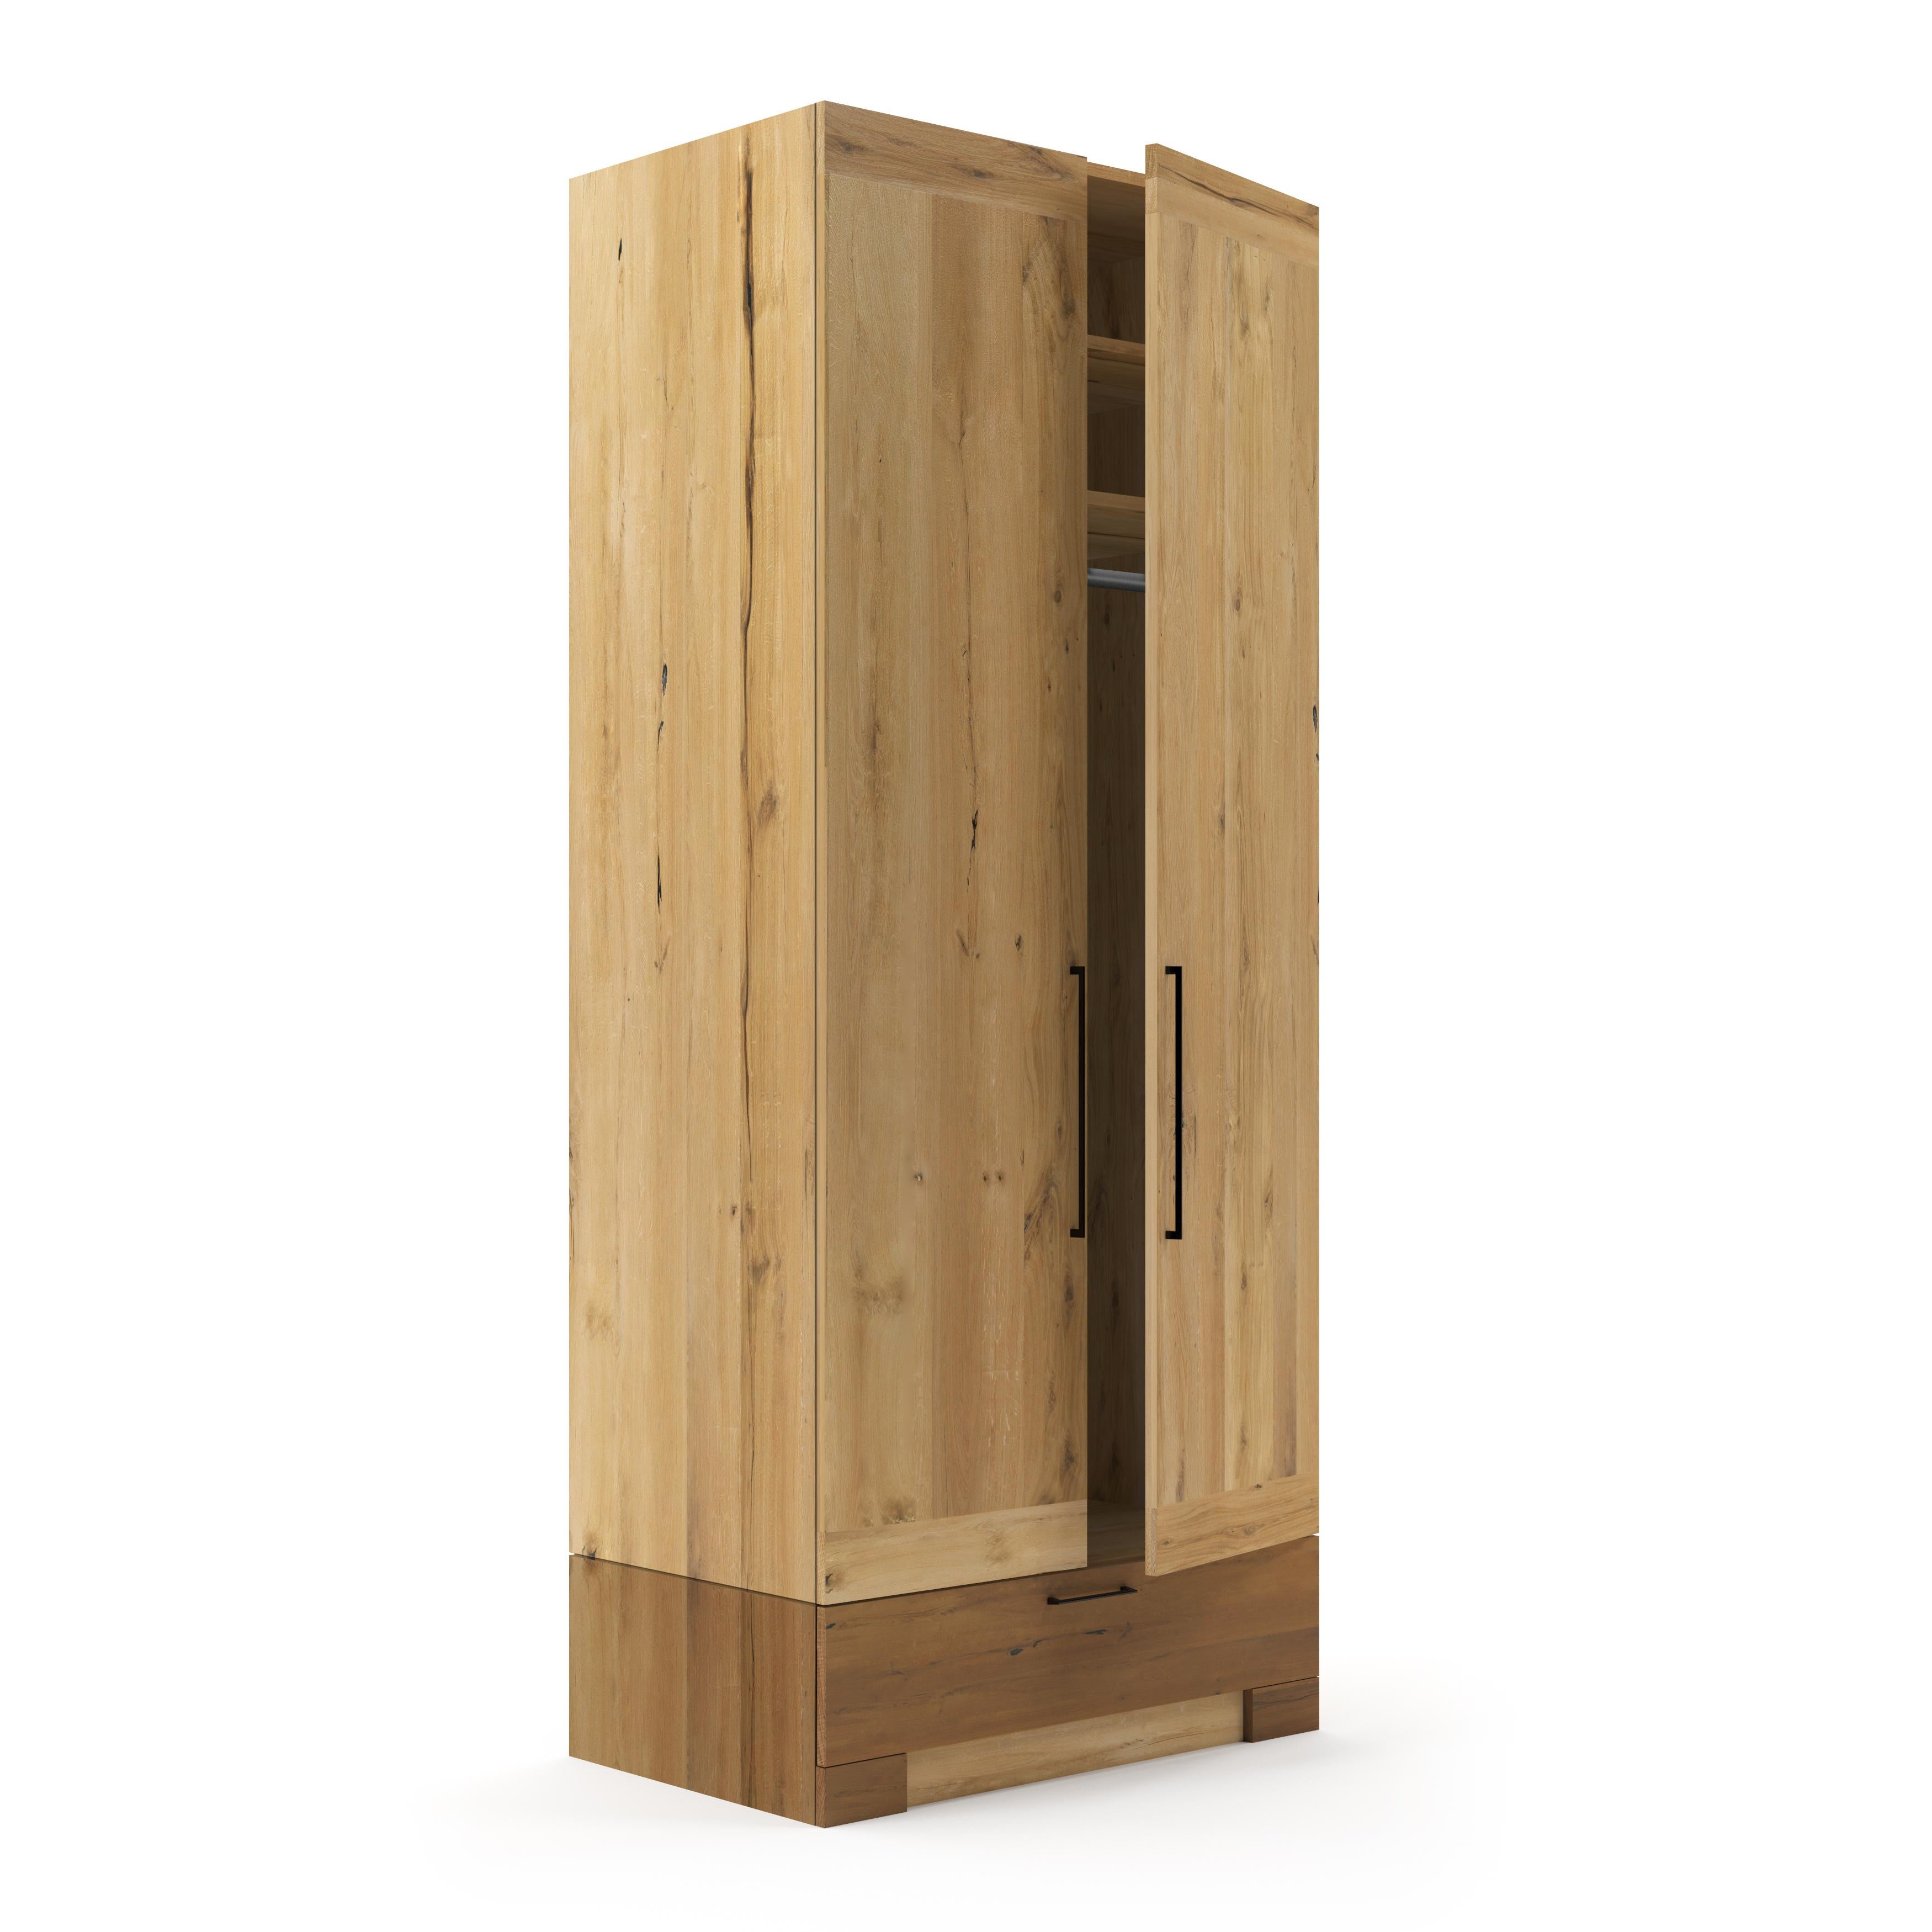 Optimize your bedroom with the stunning Pana-Wardrobe! Offering convenient storage, beauty, and a minimal aesthetic, it's the perfect way to enhance any bedroom. Enjoy the beauty and functionality of this unique wardrobe today!

All Tektōn pieces